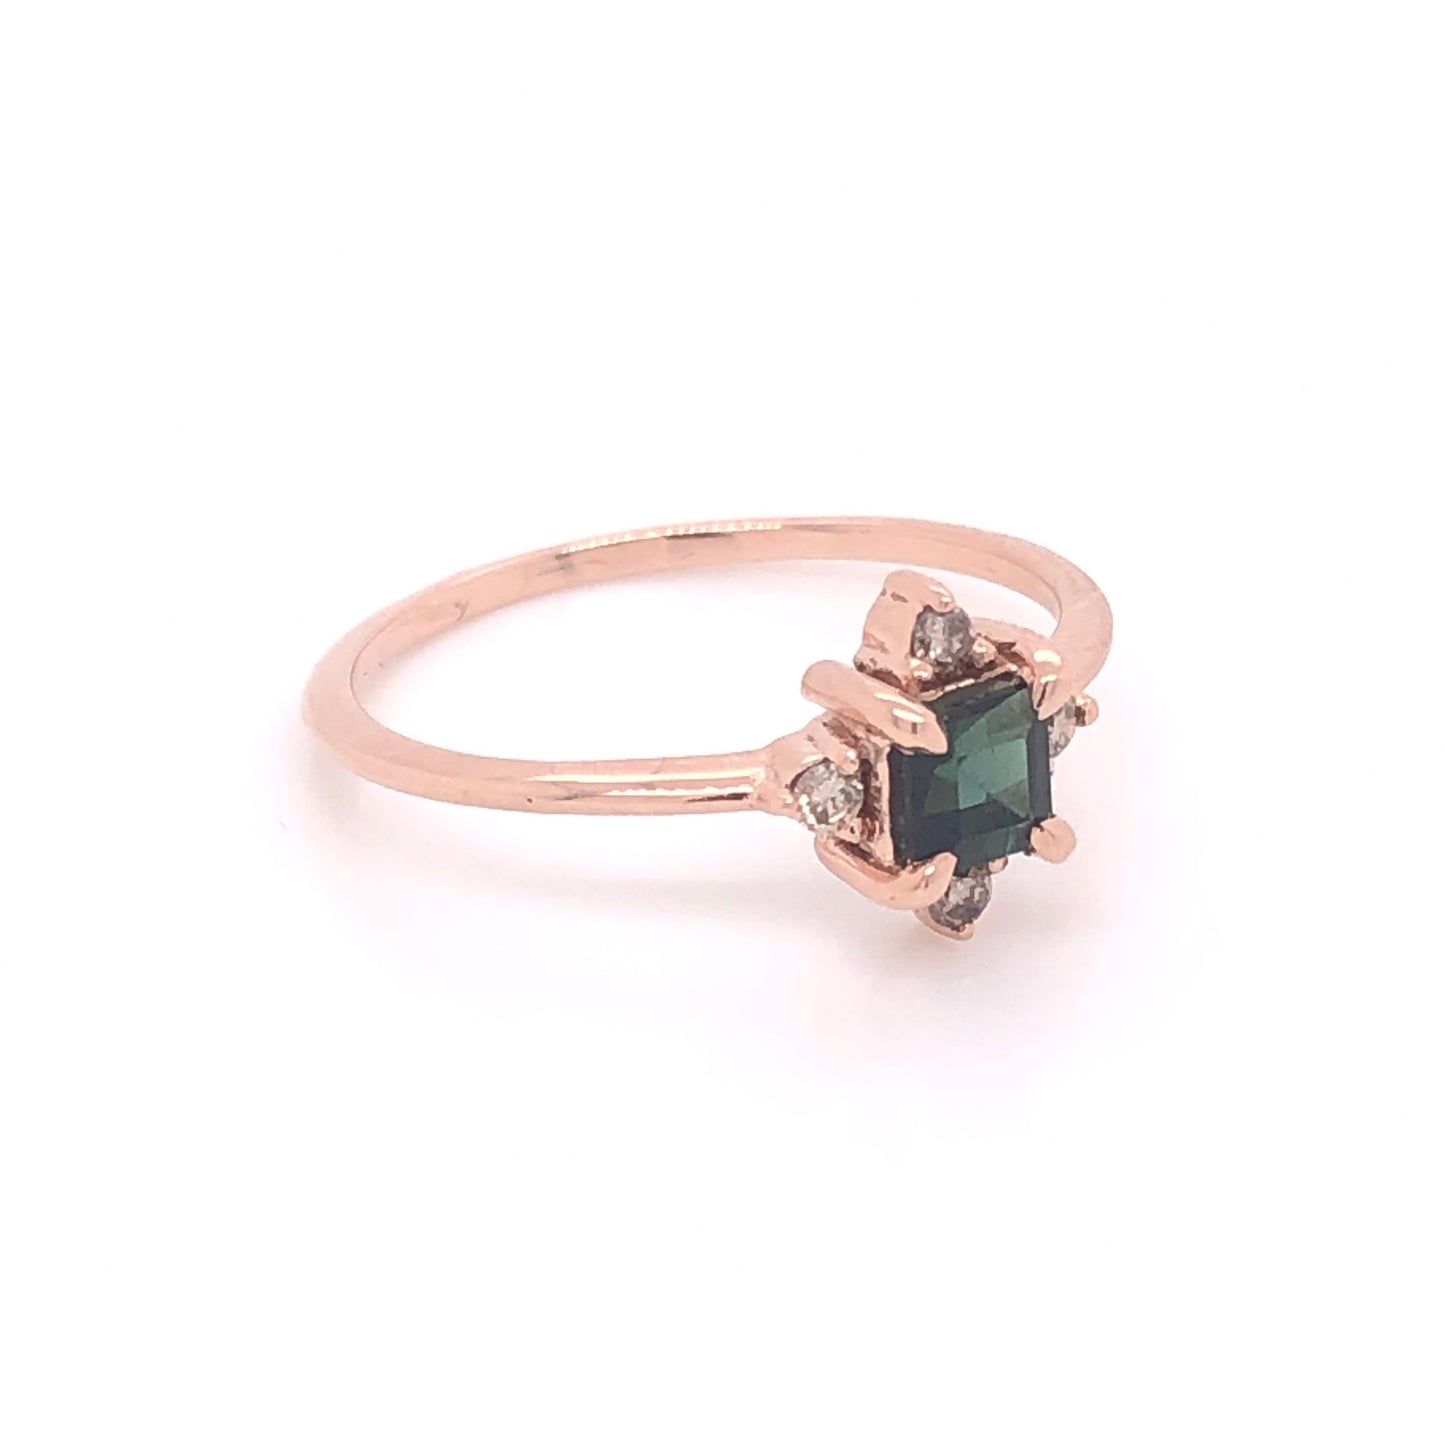 IMMEDIATE DELIVERY / Marie Antoinette Ring / 14k Rose Gold / Size 7